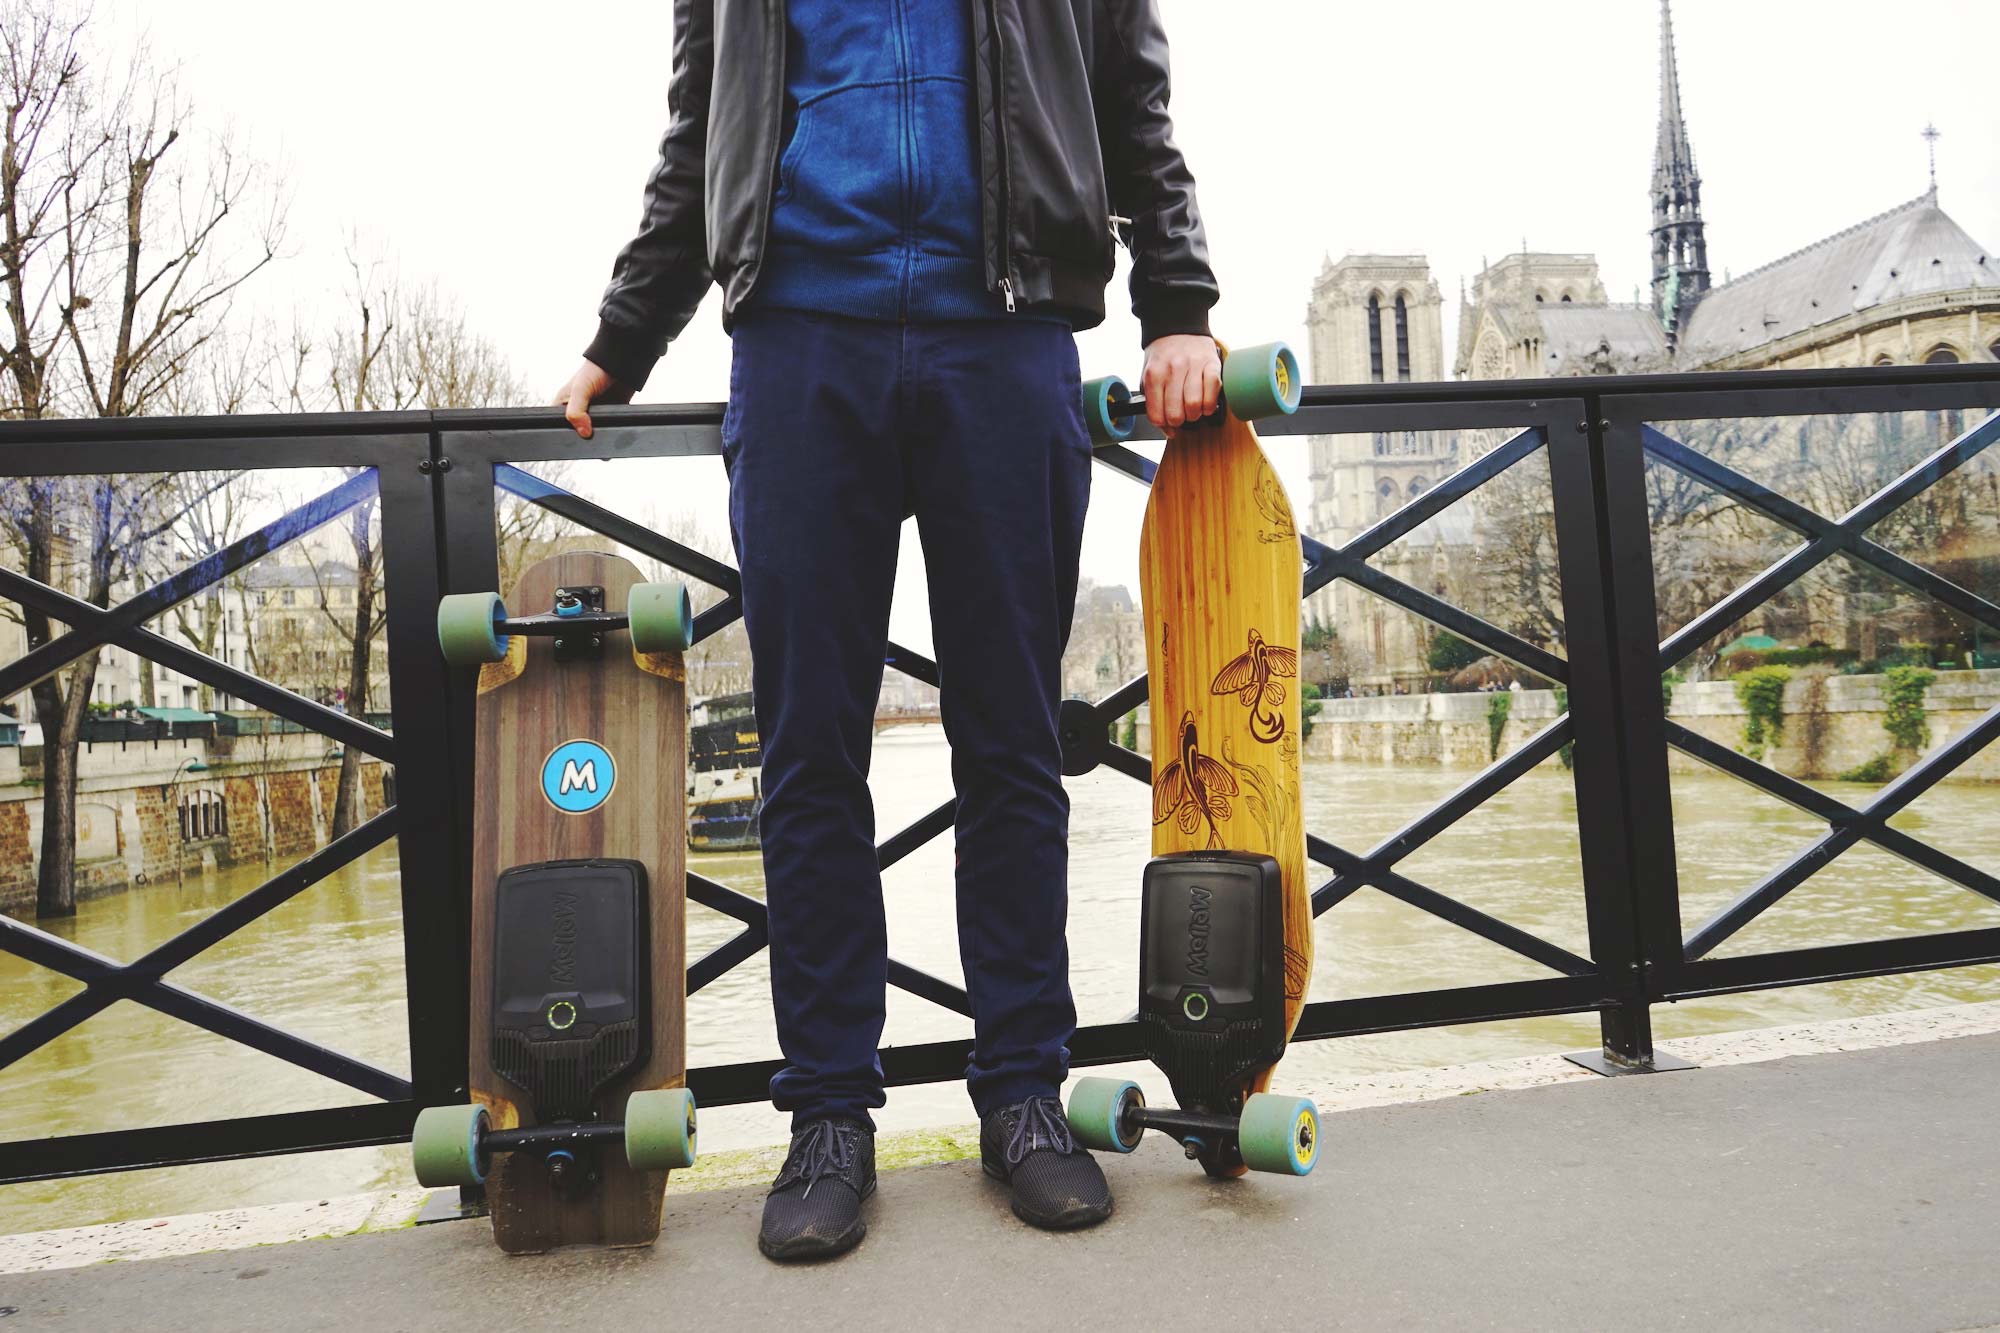 AirBnB Sightseeing in Paris on an electric skateboard